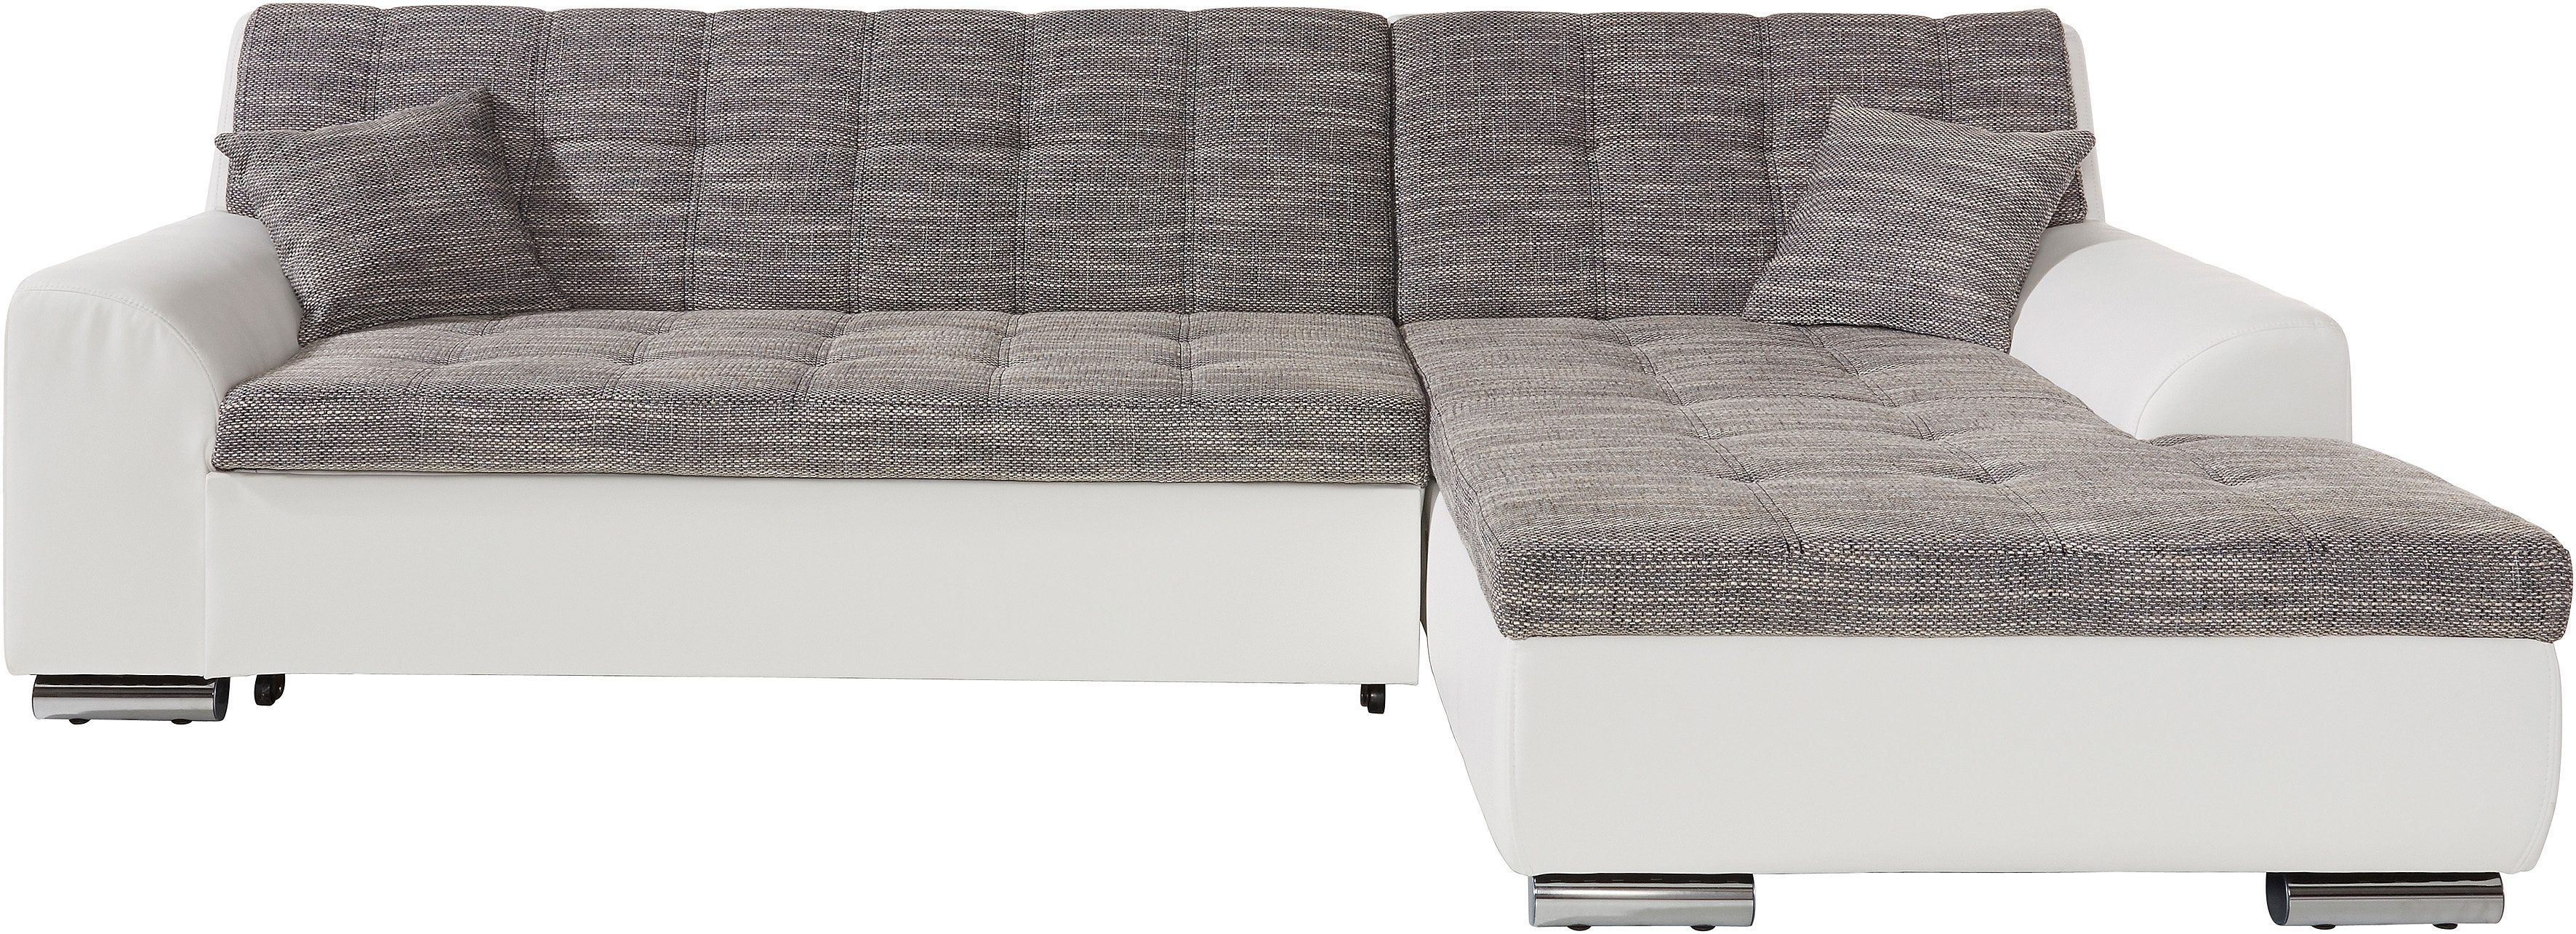 DOMO collection Ecksofa »Treviso Top«, wahlweise mit Bettfunktion-Otto